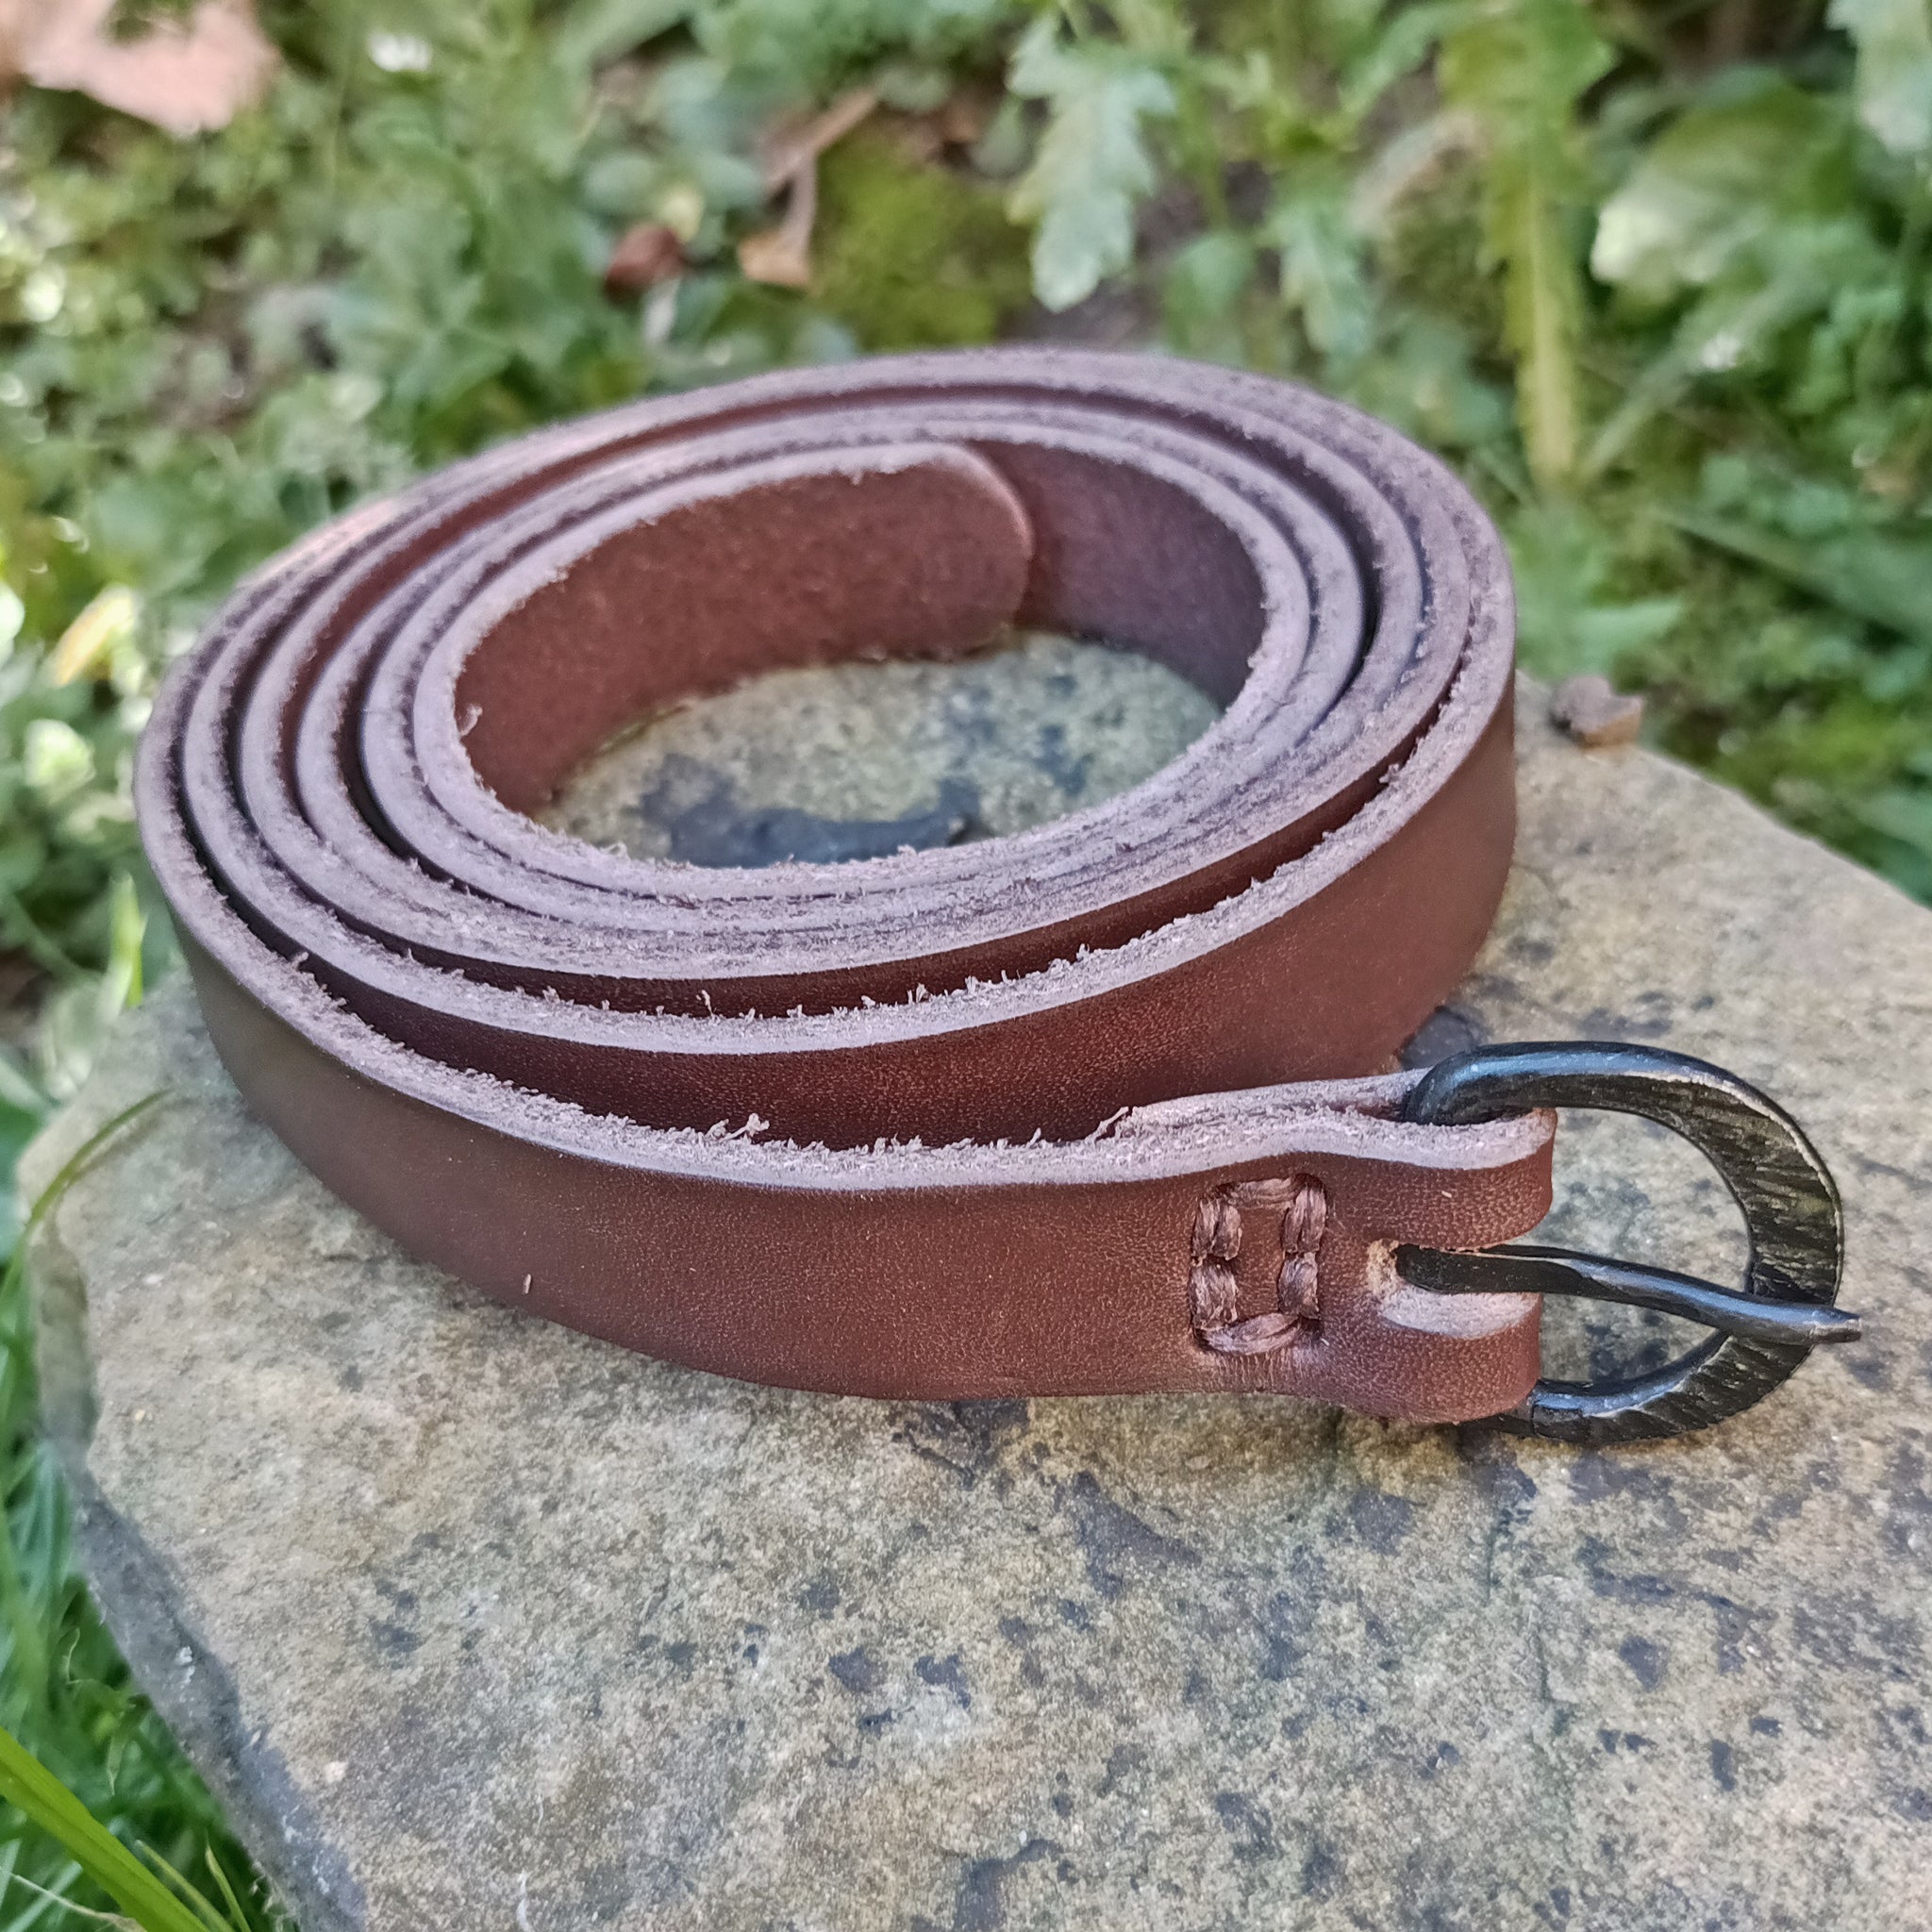 Hand-Forged Iron Viking / Medieval Buckle - 20mm (0.75 inch) on Leather Belt - On Rock